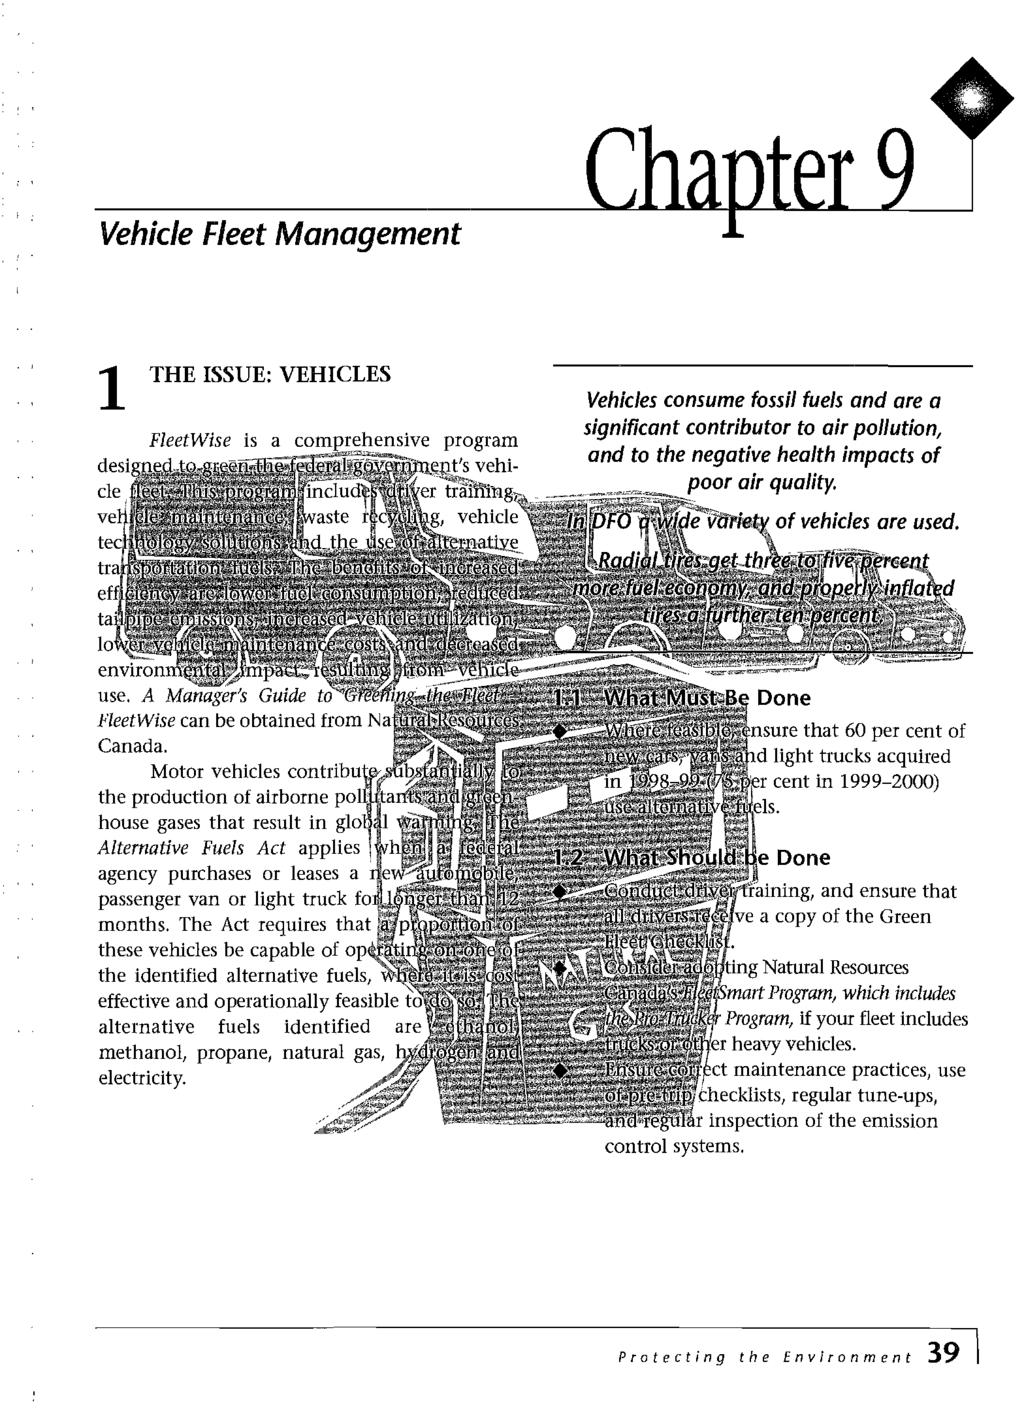 Vehicle Fleet Management THE SSUE: VEHCES Vehicles consume fossil fuels and ae a significant contibuto to ai pollution, and to the negative health impacts of ai quality. Vlil'iBiW of vehicles ae used.